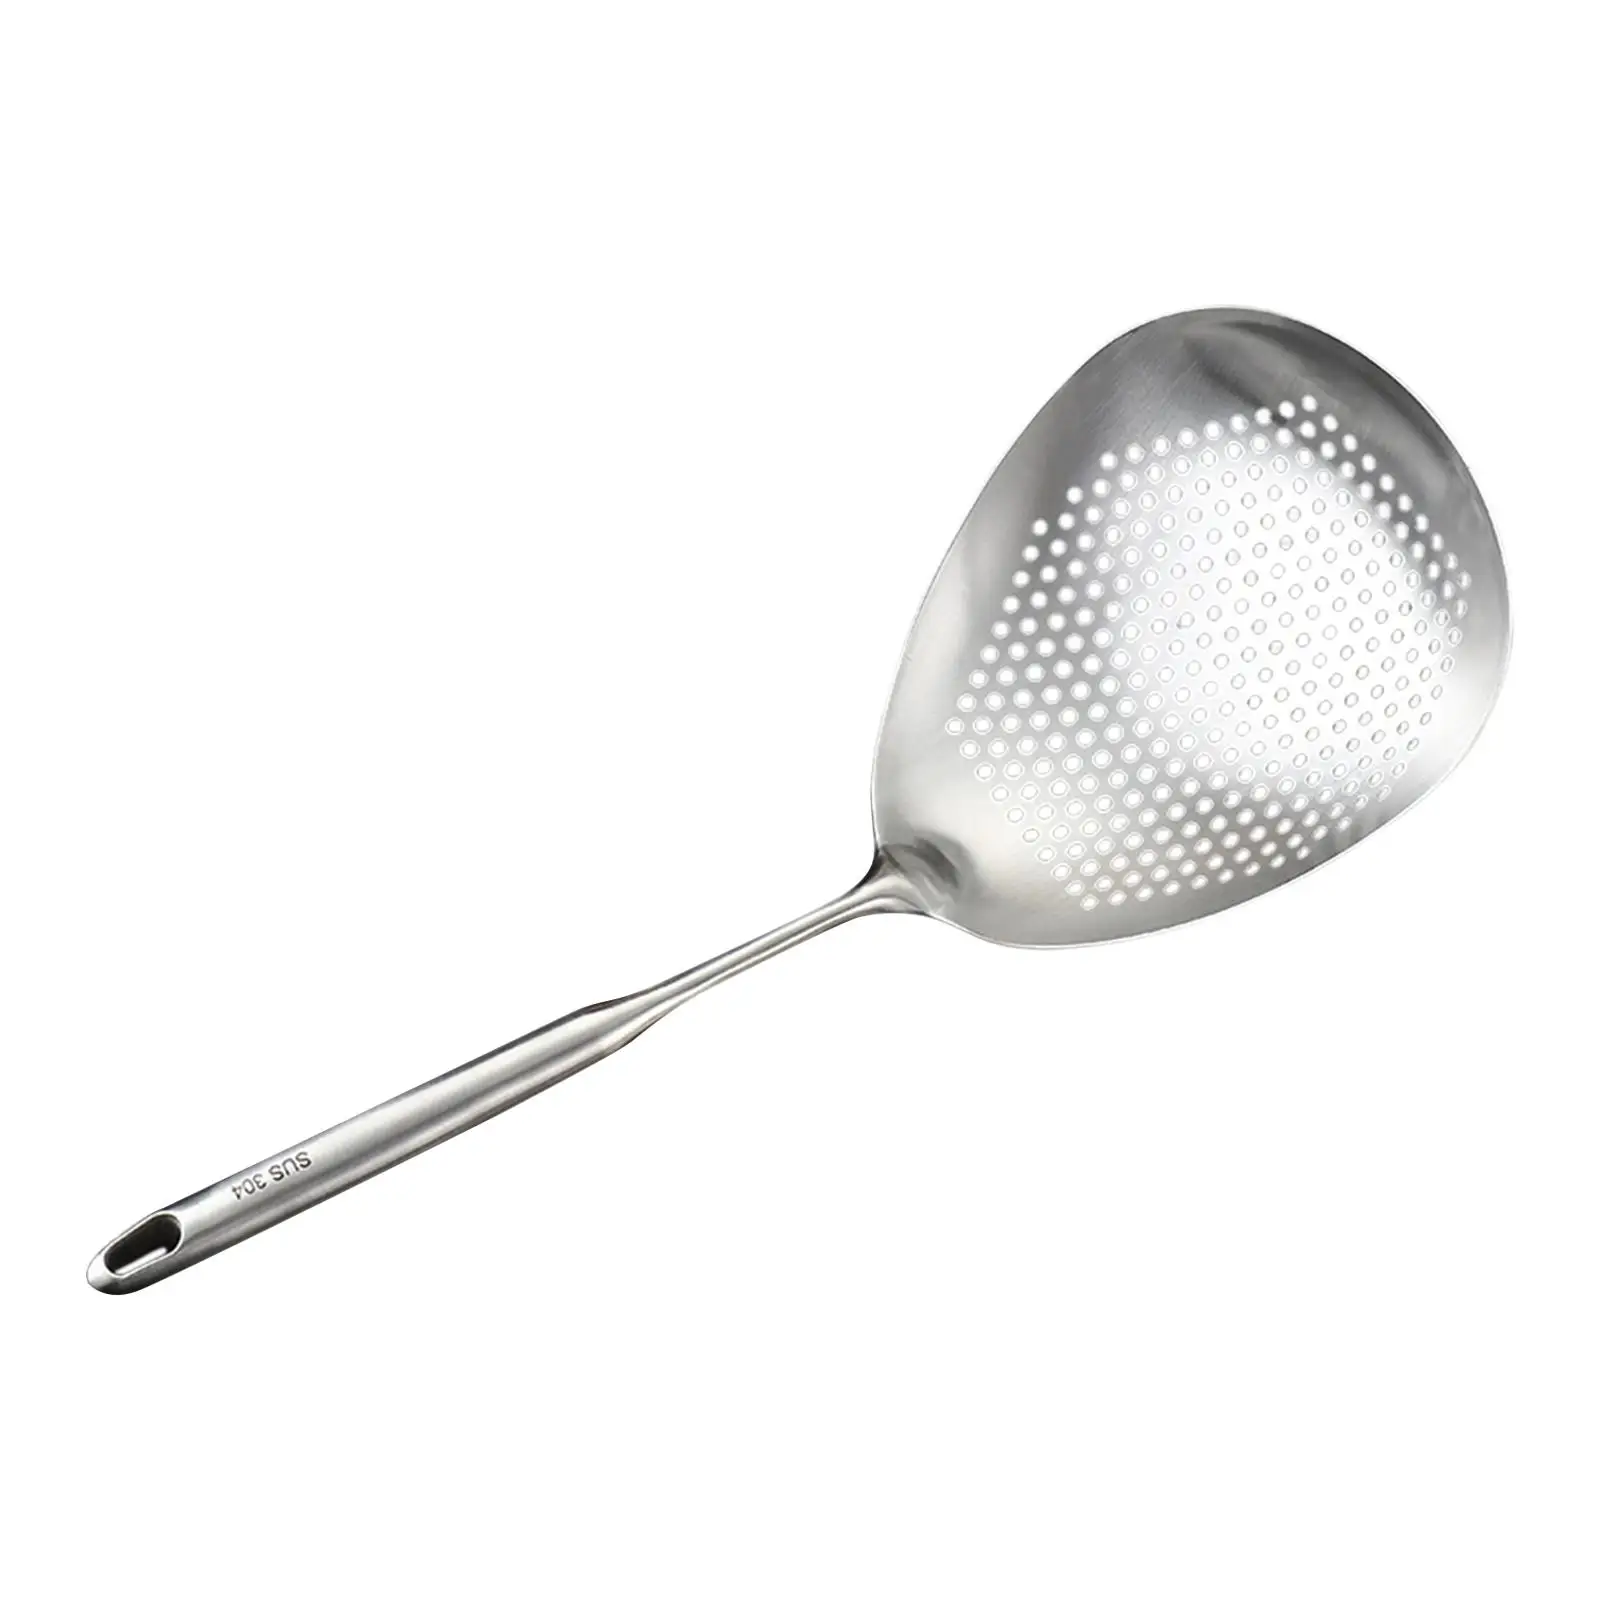 Stainless Steel Skimmer Slotted Spoon with Hanging Hole Wooden Handle Anti Scald Pasta Spaghetti Drain Spoon for Baking Scooping